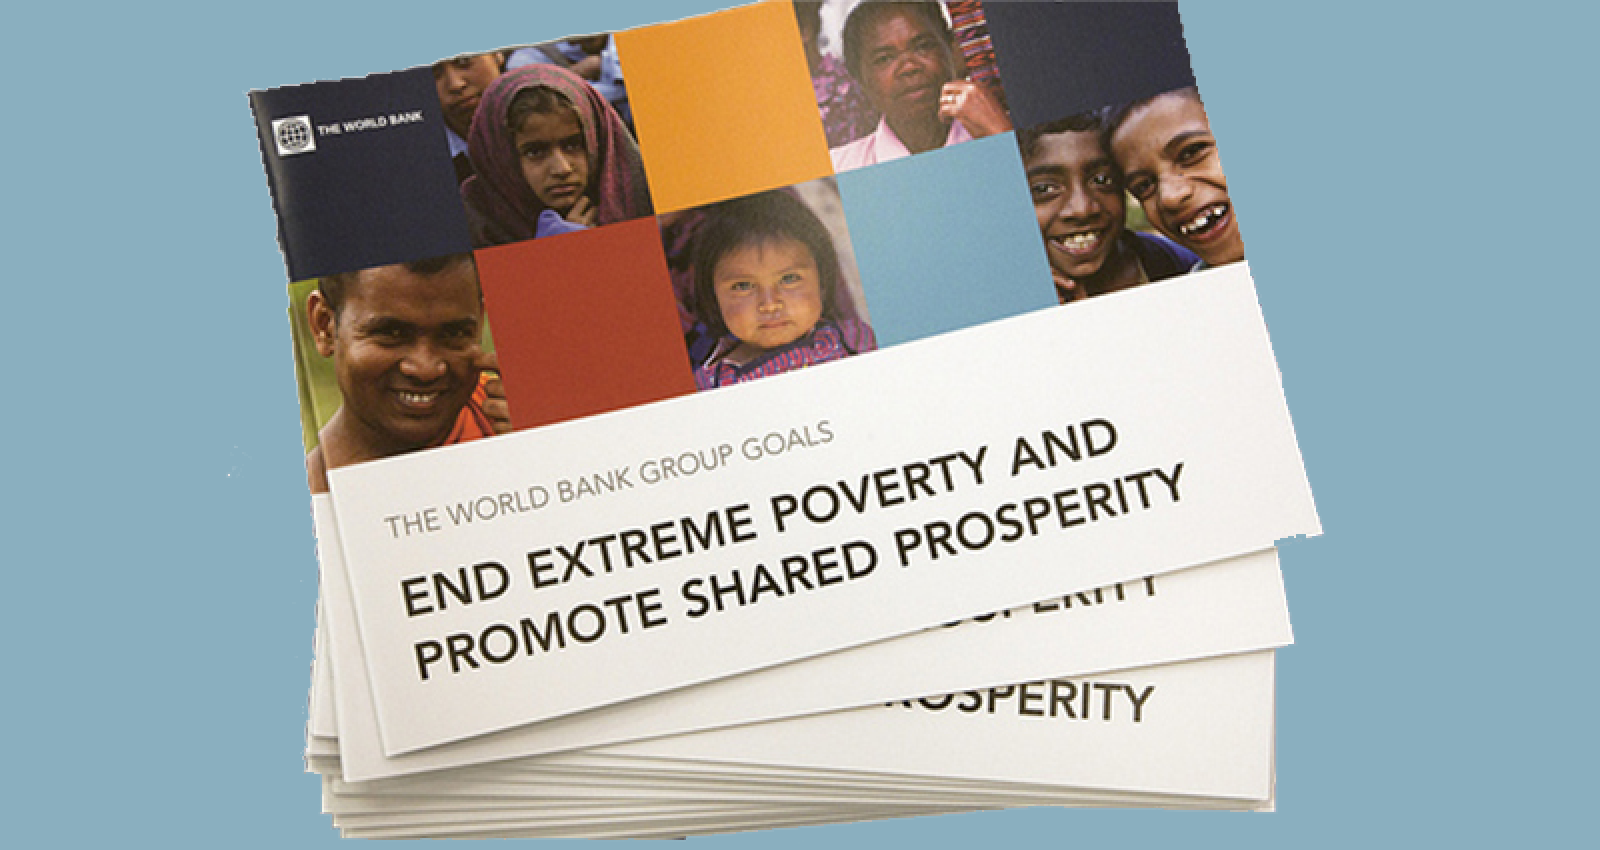 How do World Bank Group Staff Understand the Shared Prosperity Goal